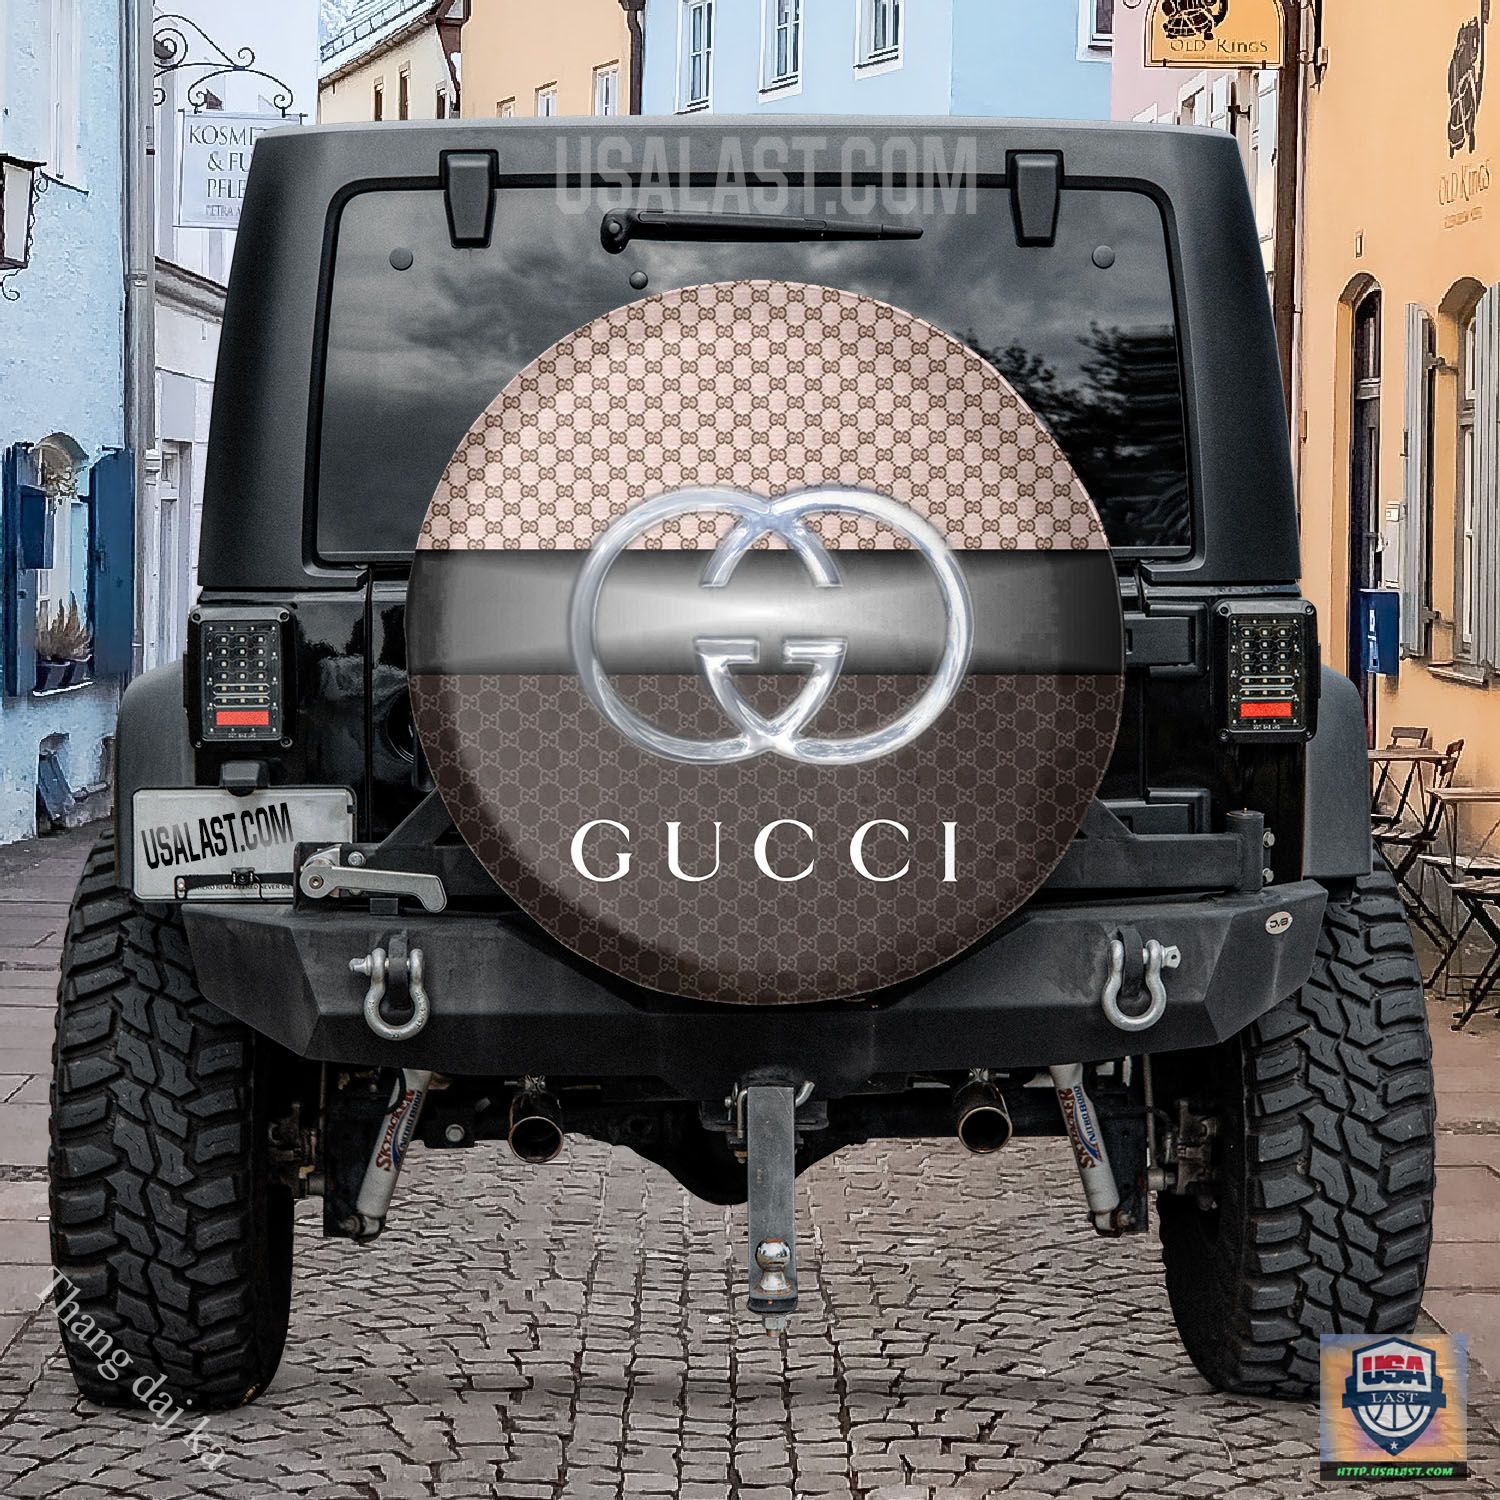 Gucci Pink Black White And Silver Spare Tire Covers